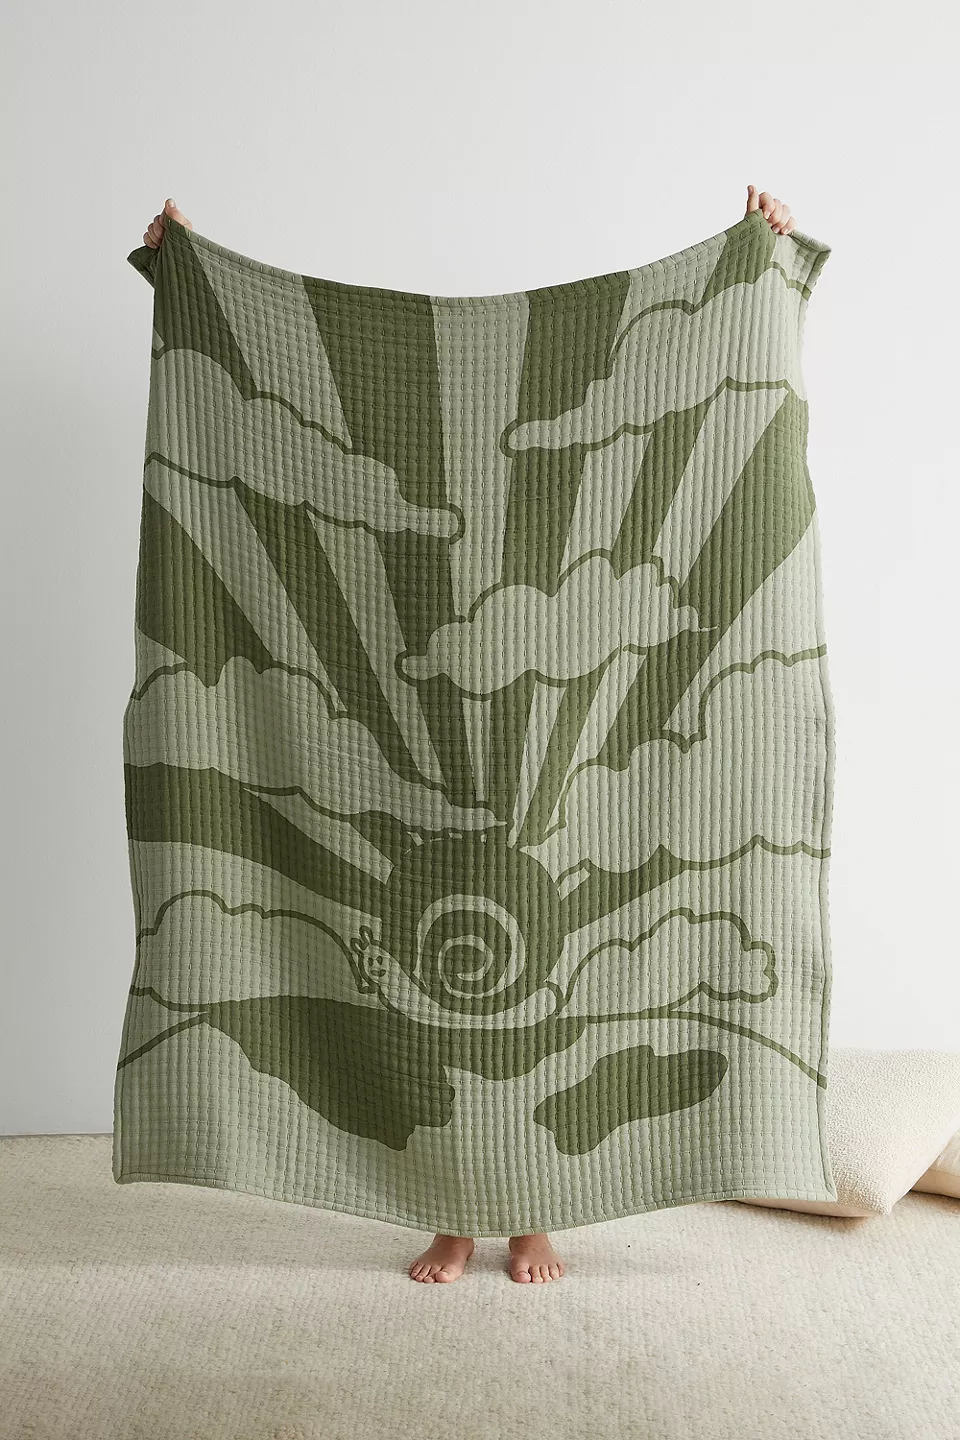 urbanoutfitters.com | Snail Throw Blanket